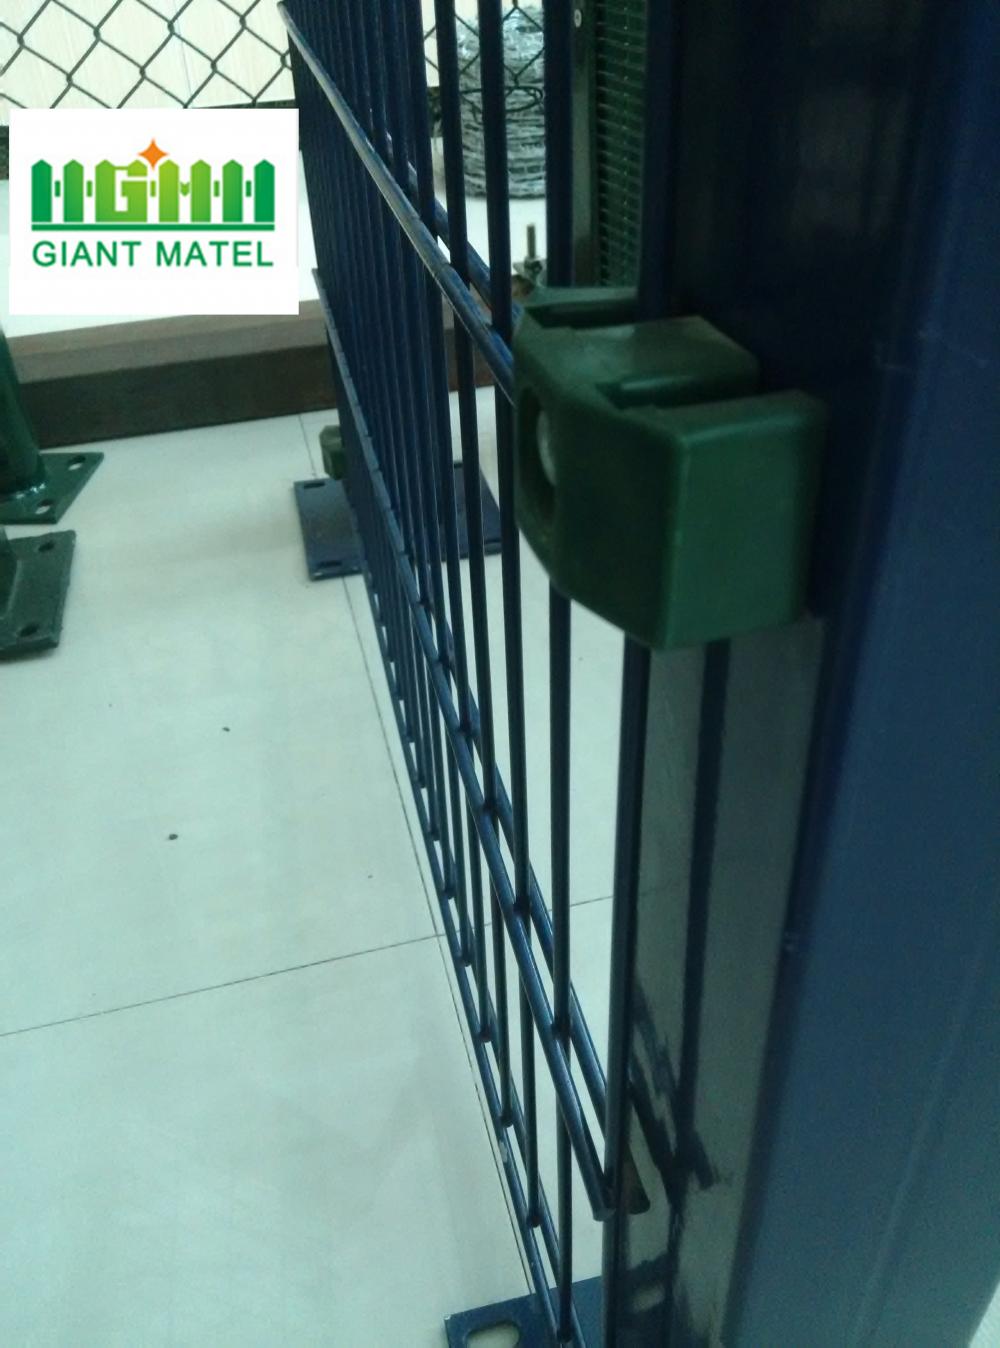 factory supply pvc coated double wires welded mesh fence